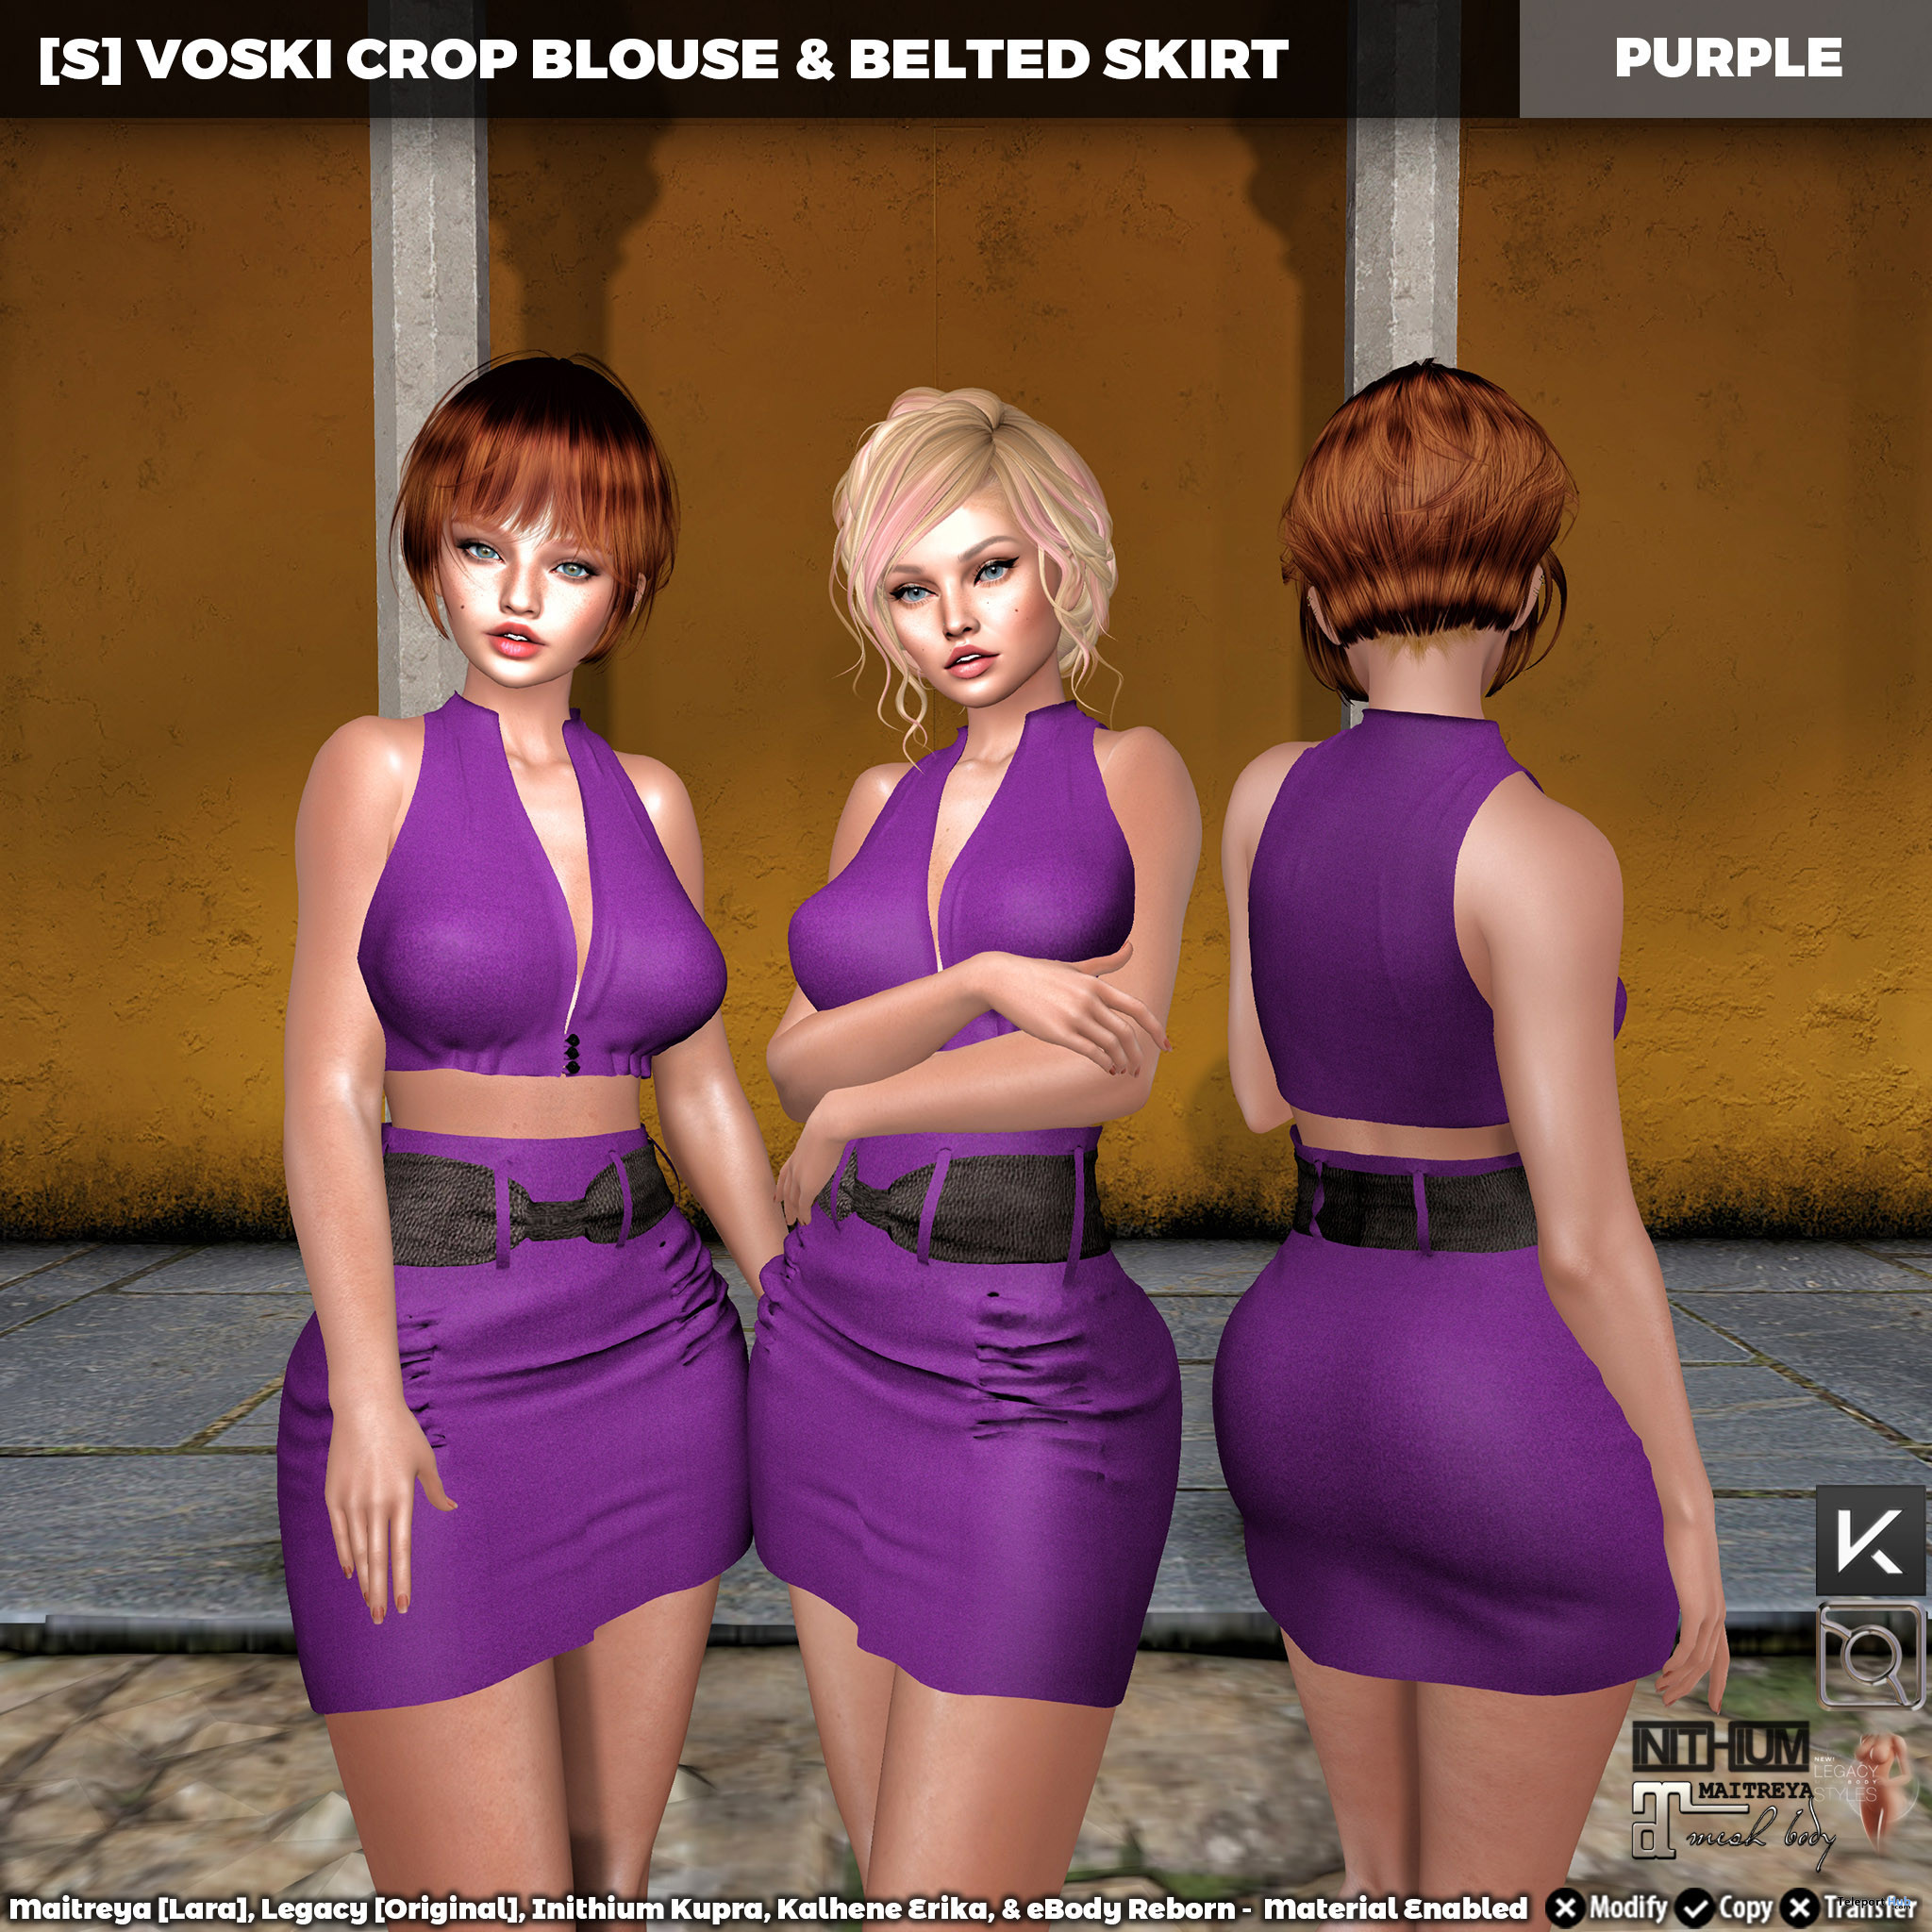 New Release: [S] Voski Crop Blouse & Belted Skirt by [satus Inc] - Teleport Hub - teleporthub.com